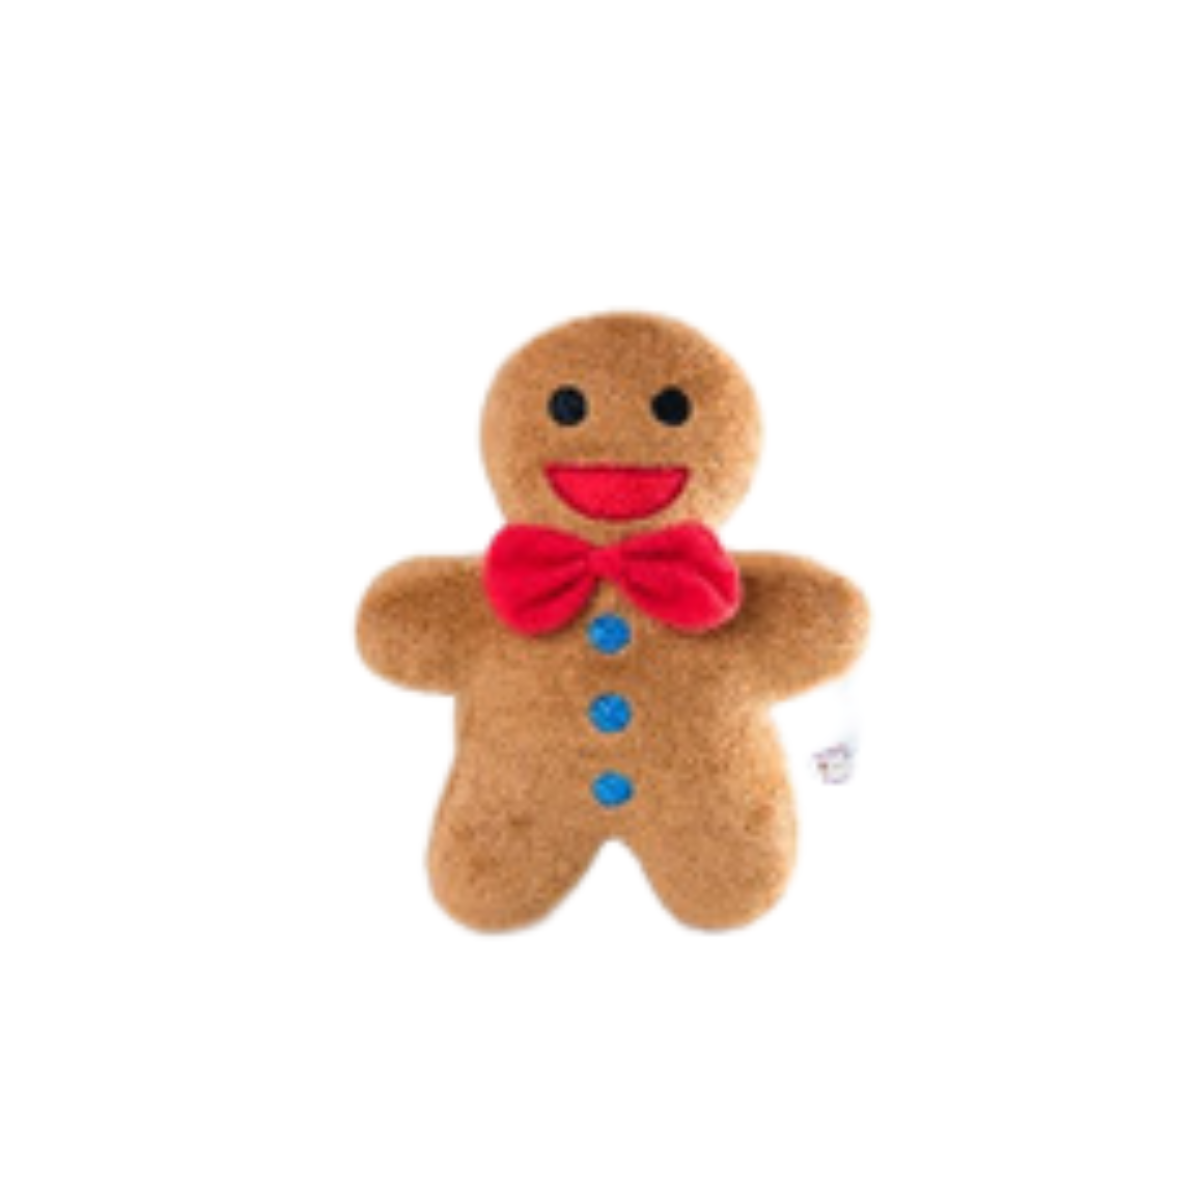 Doggie Goodie - Gingerbread Baby